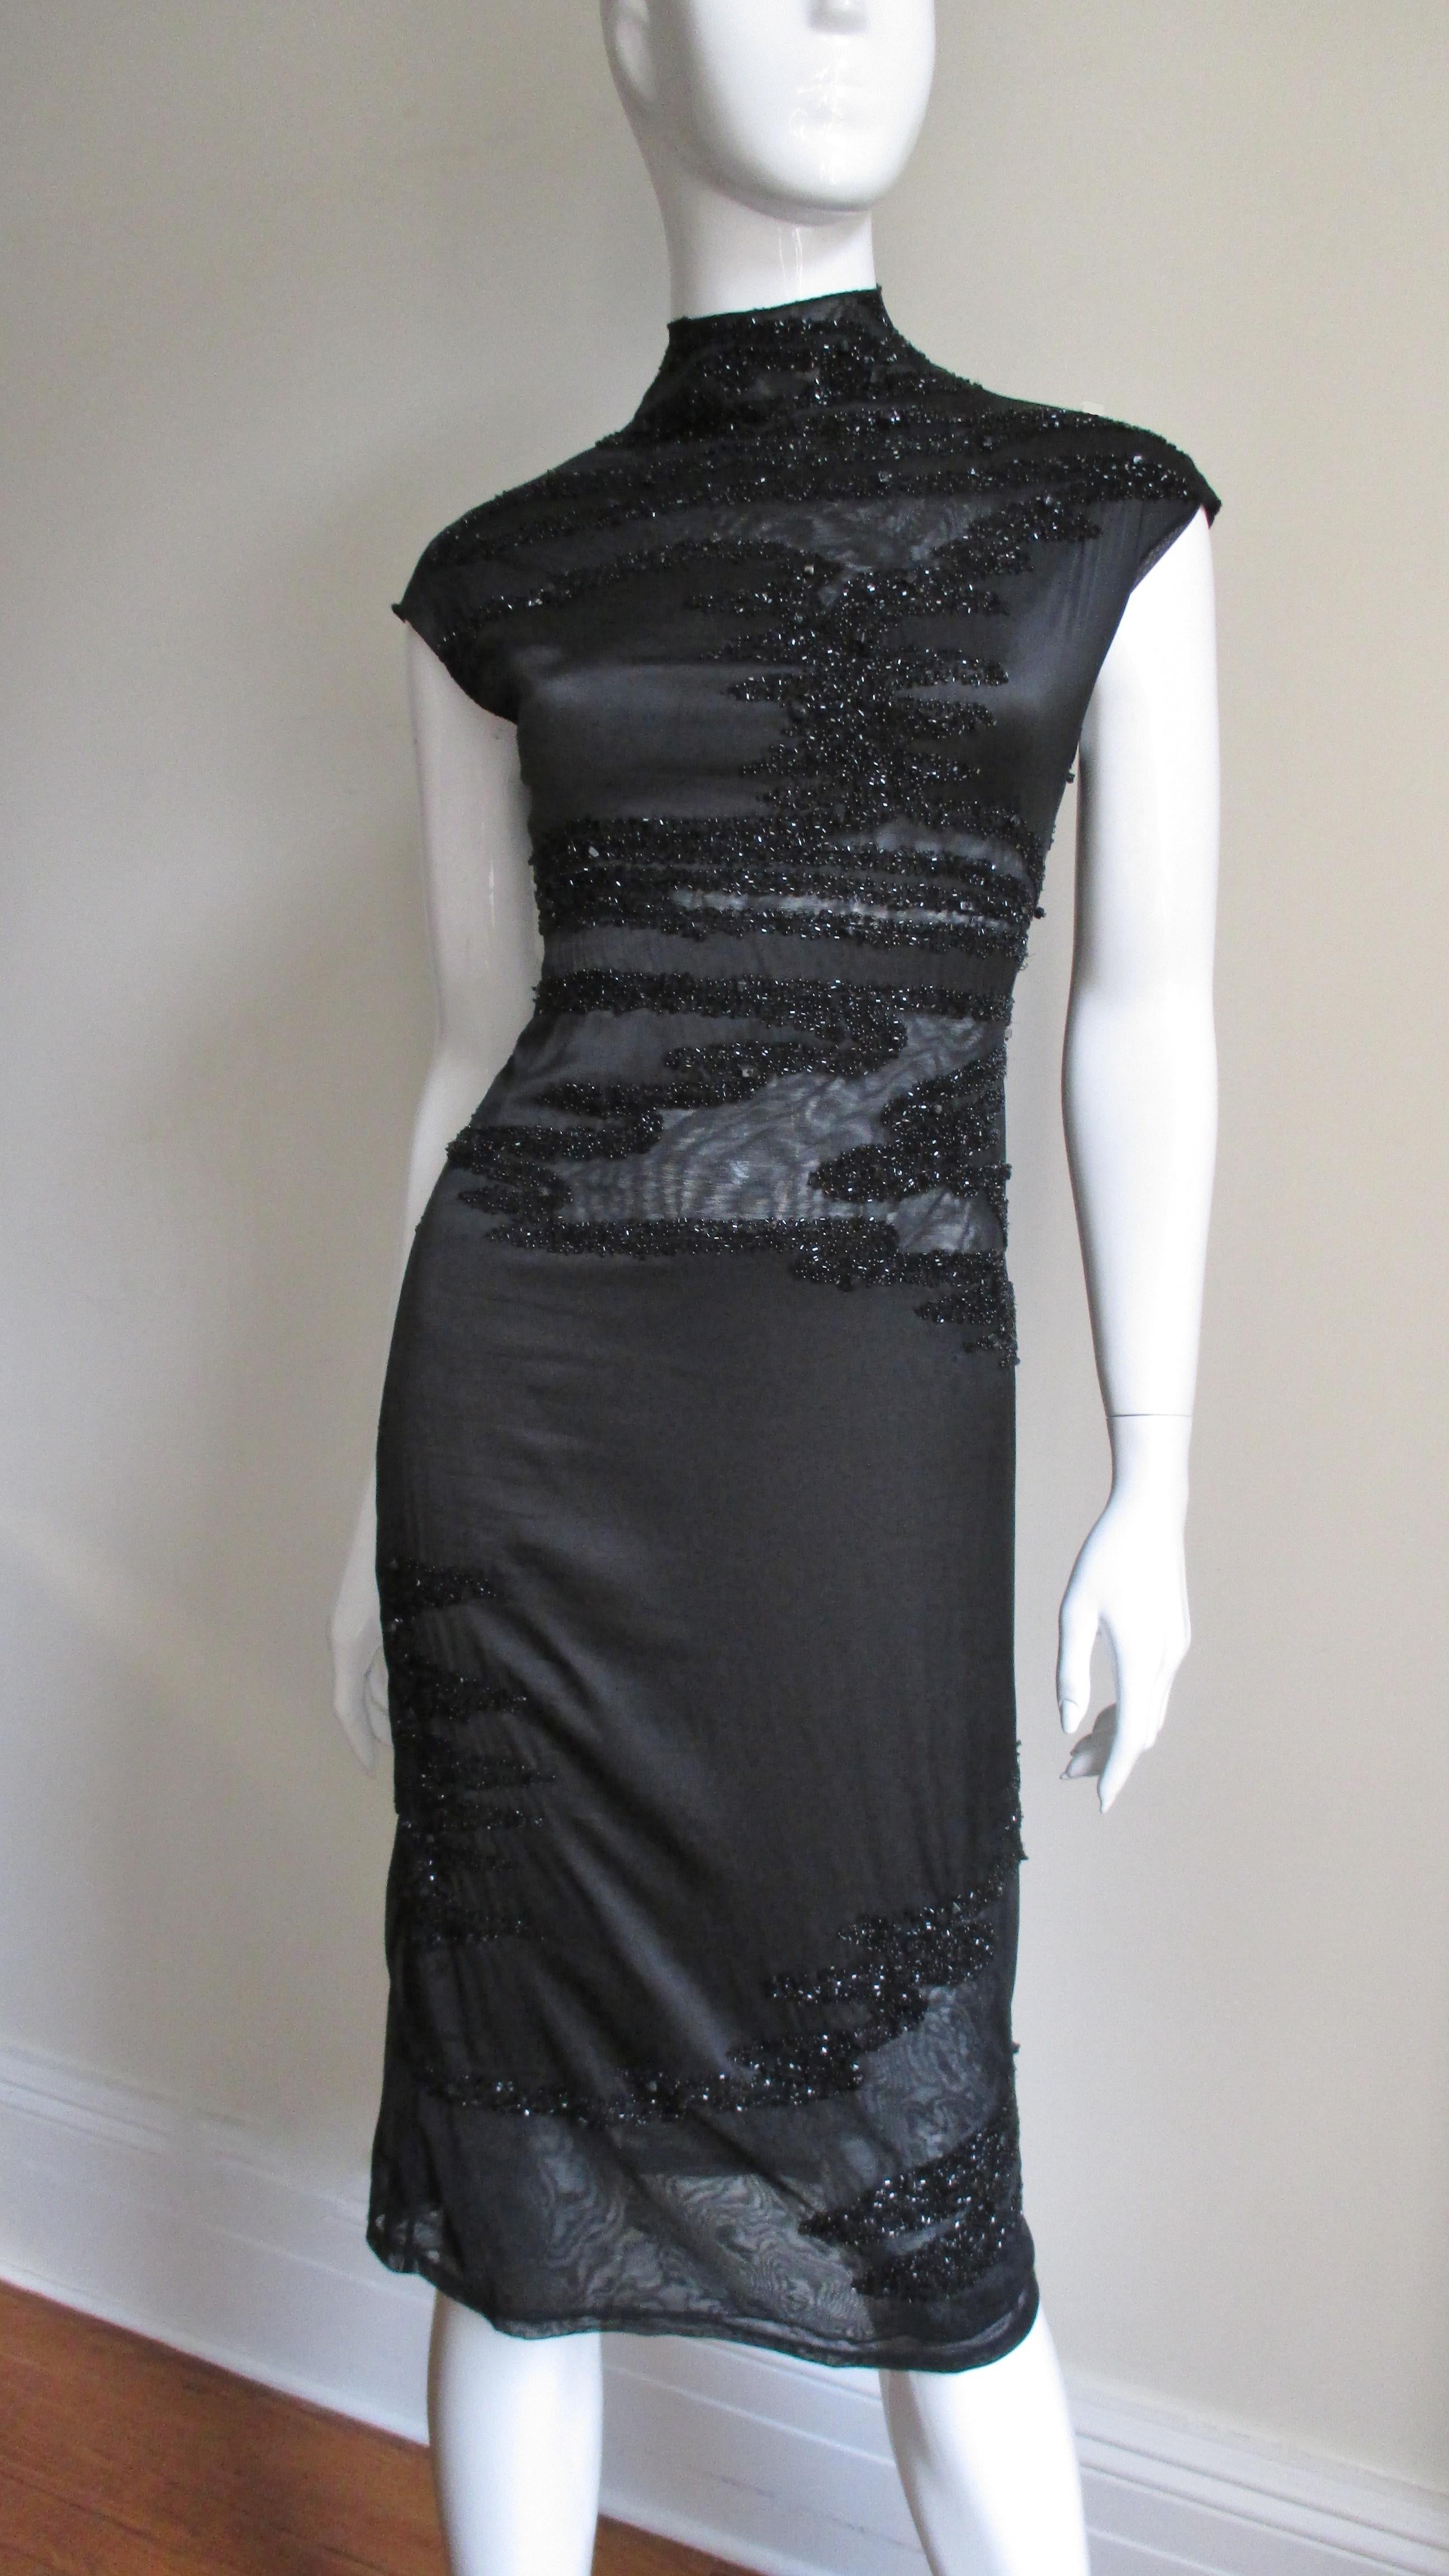  Krizia Dress with Bead Trim 1990s In Good Condition For Sale In Water Mill, NY